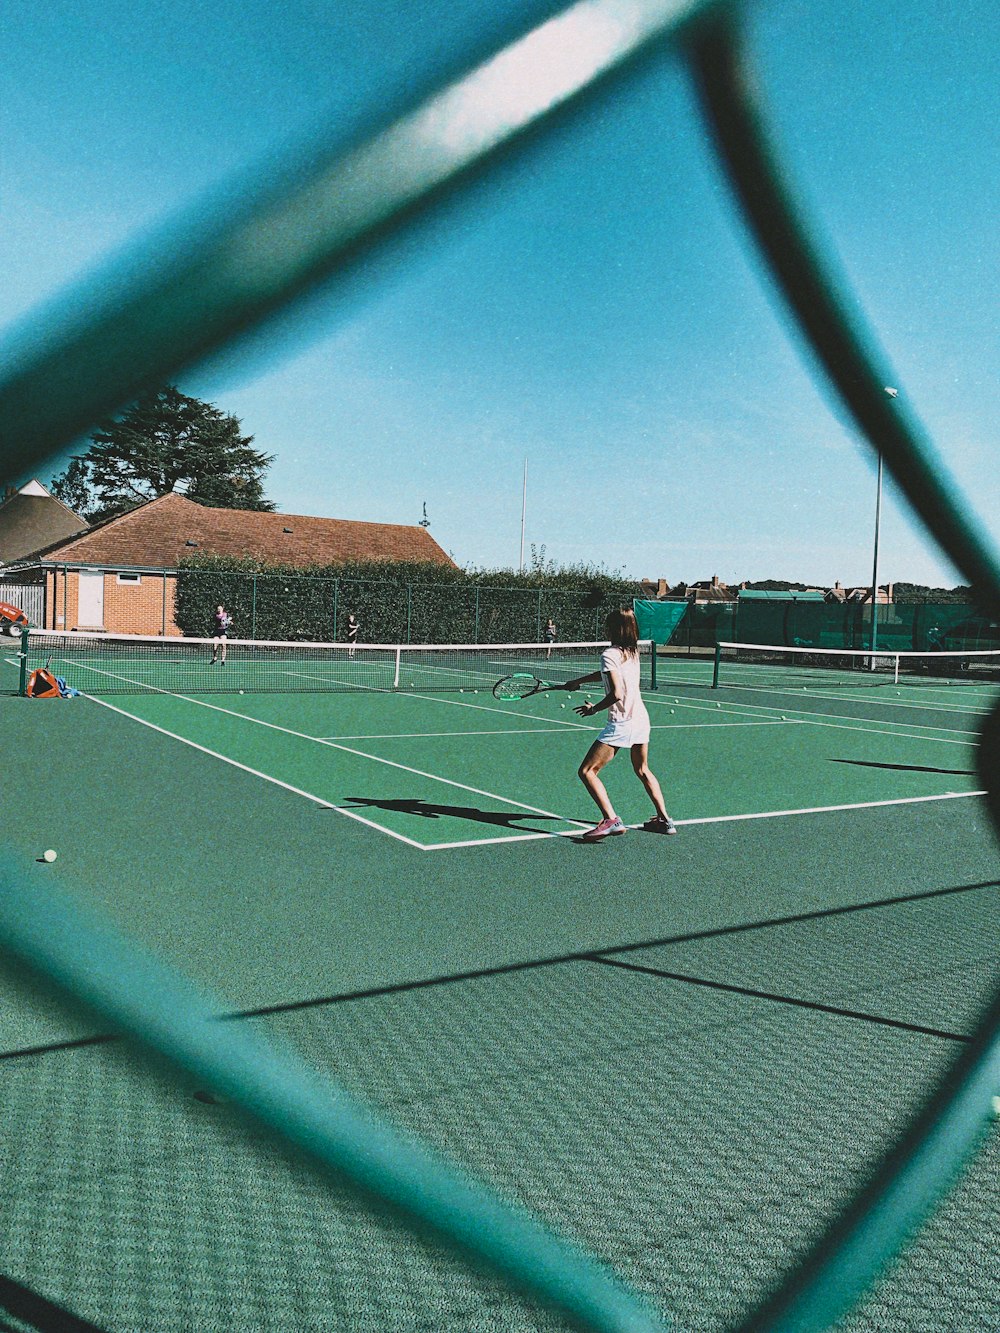 woman playing tennis on court